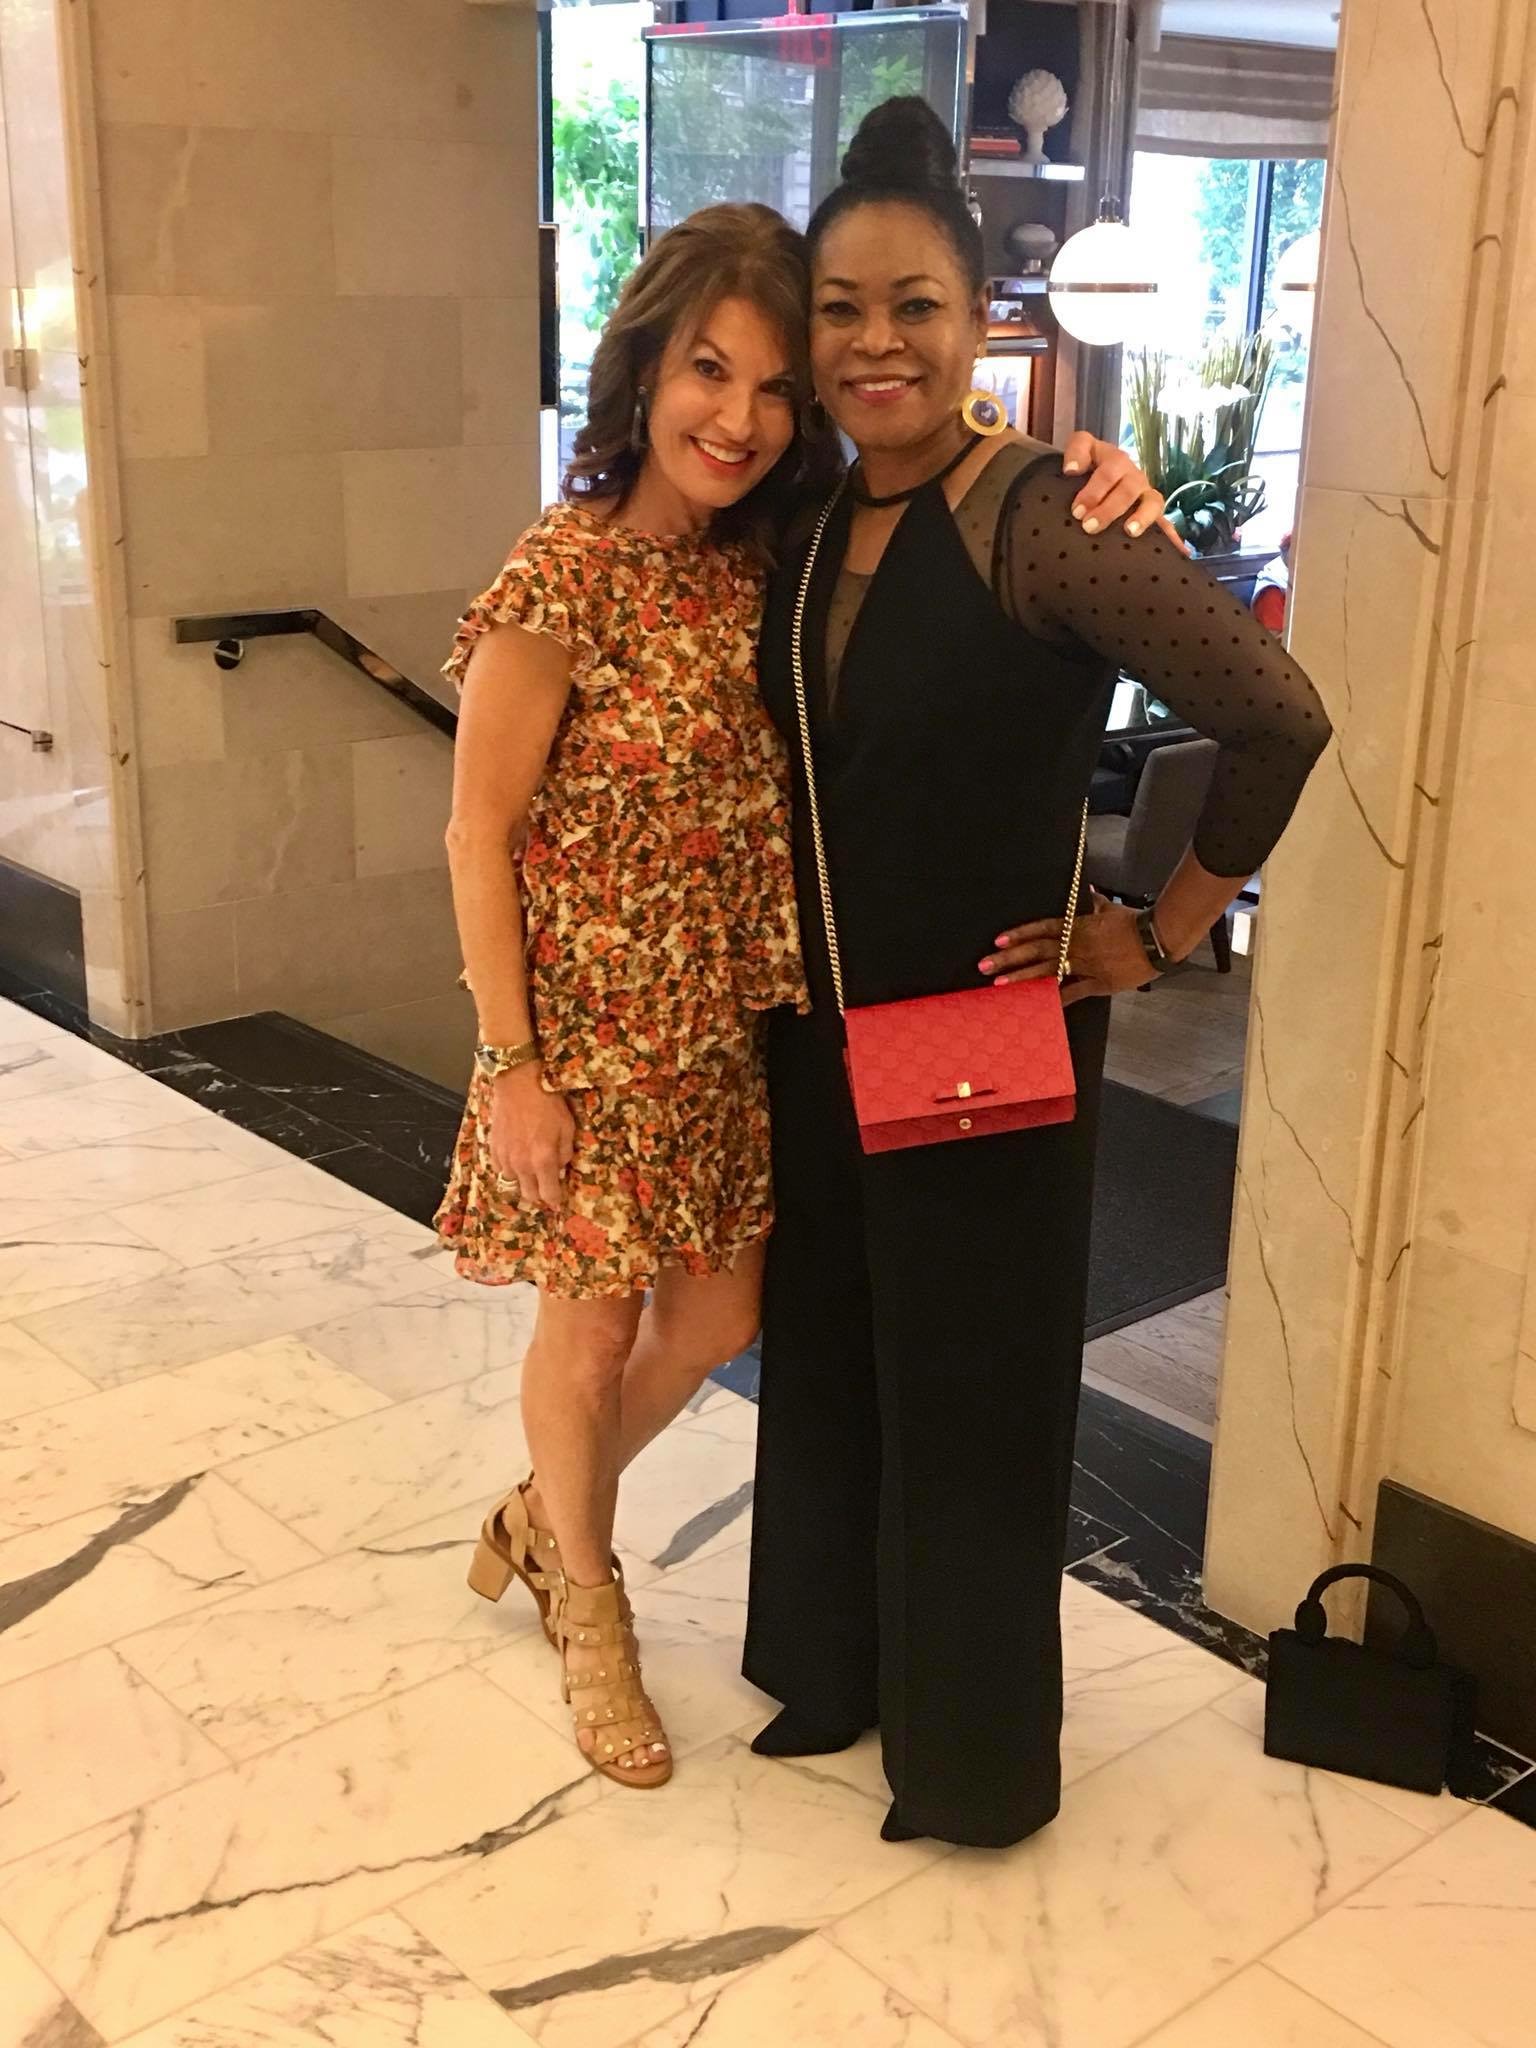 Virtual Connection Became Real in NYC; Leslie Wolman Meets The Age of Grace